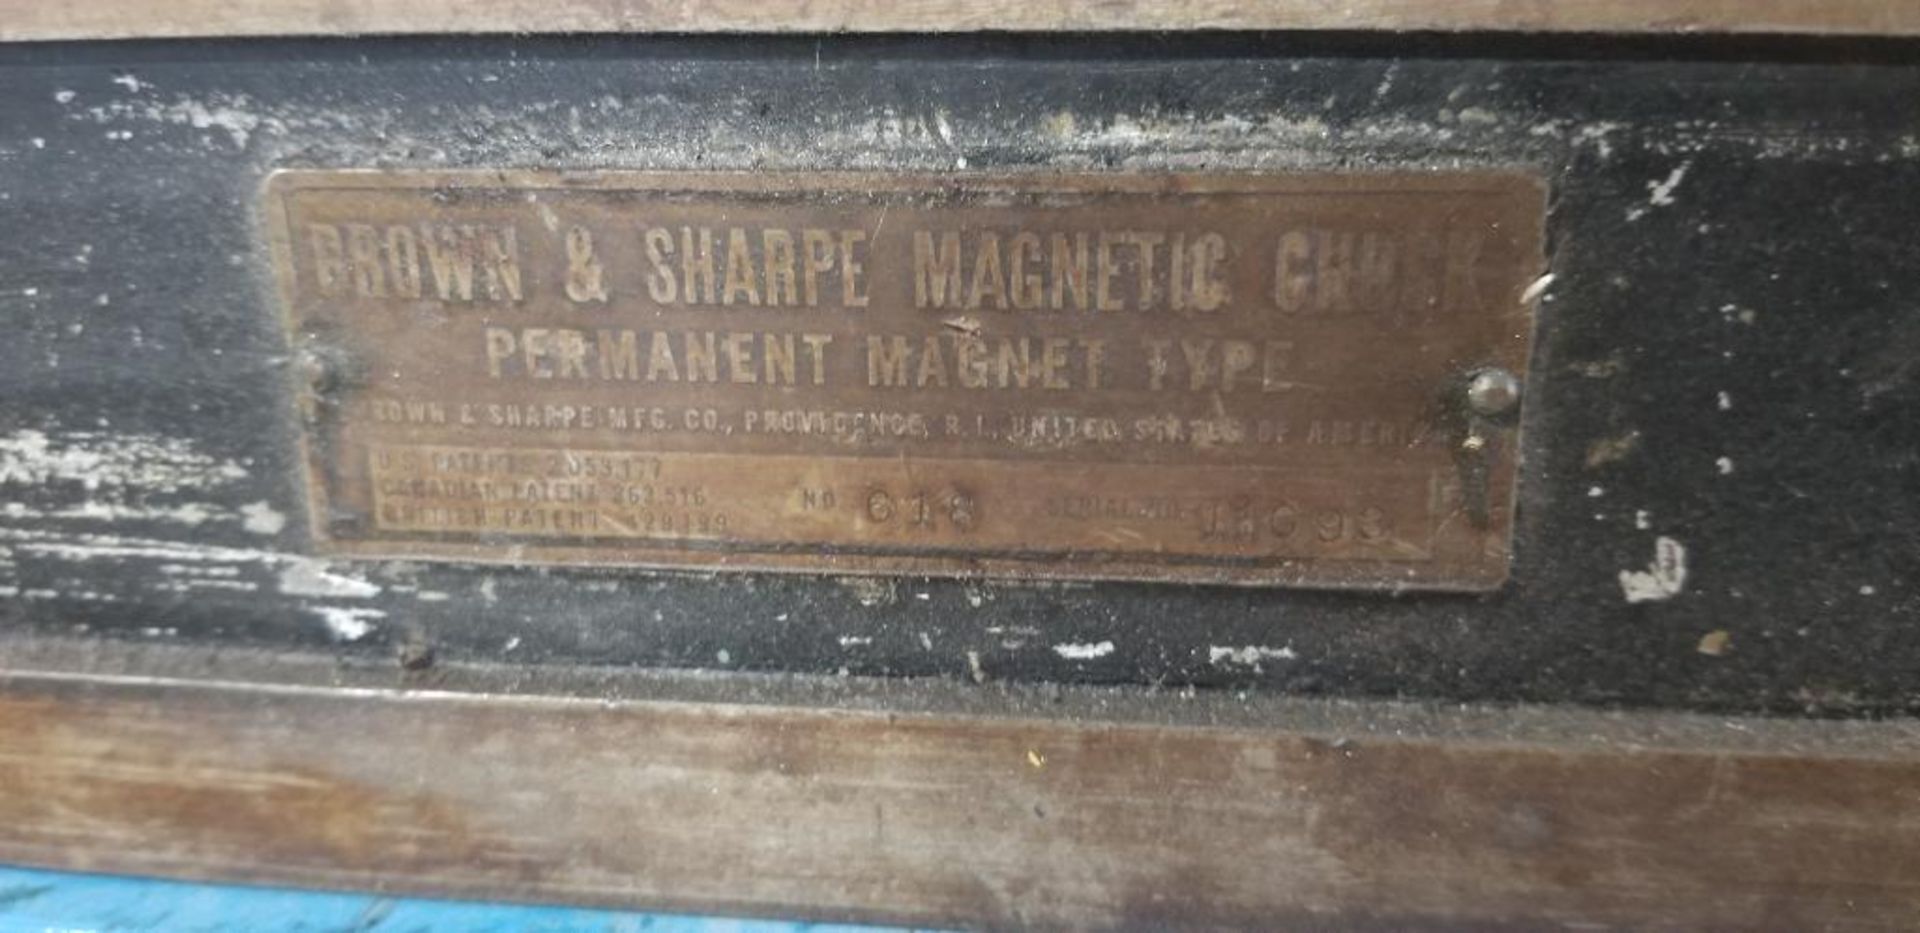 Brown & Sharpe Magnetic Chuck - Image 3 of 3